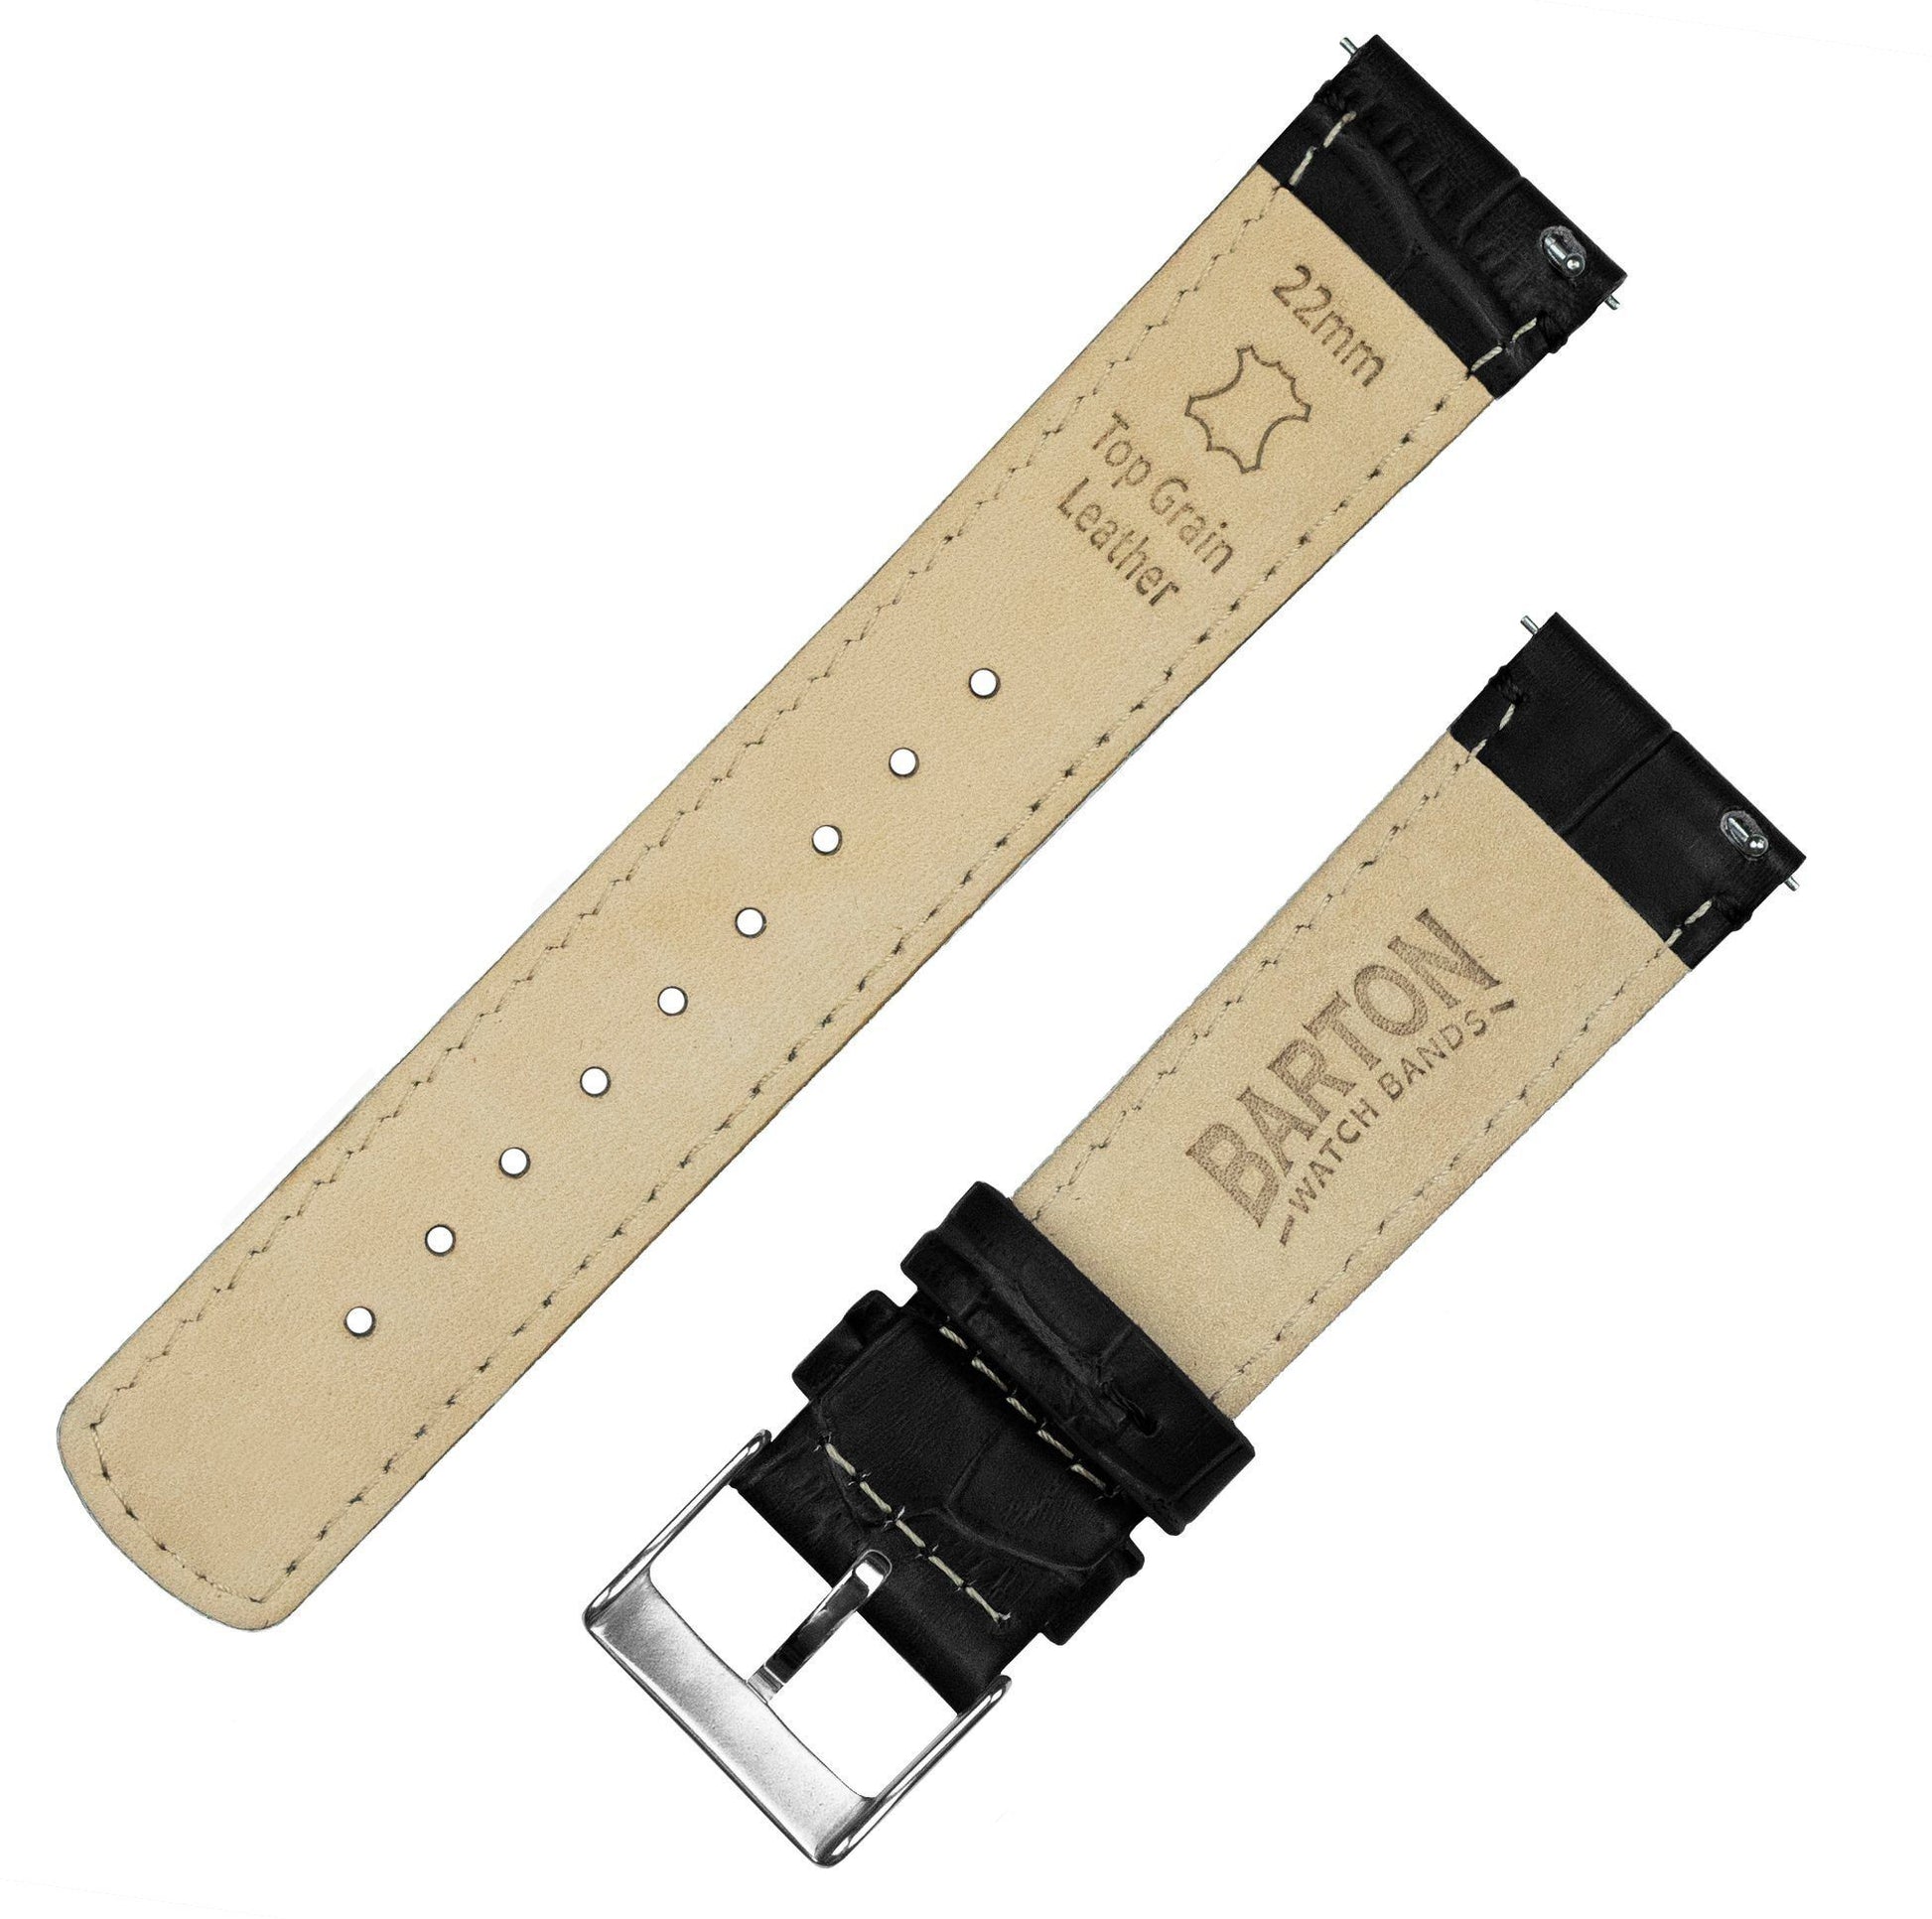 Withings Nokia Activité and Steel HR | Black Alligator Grain Leather - Barton Watch Bands